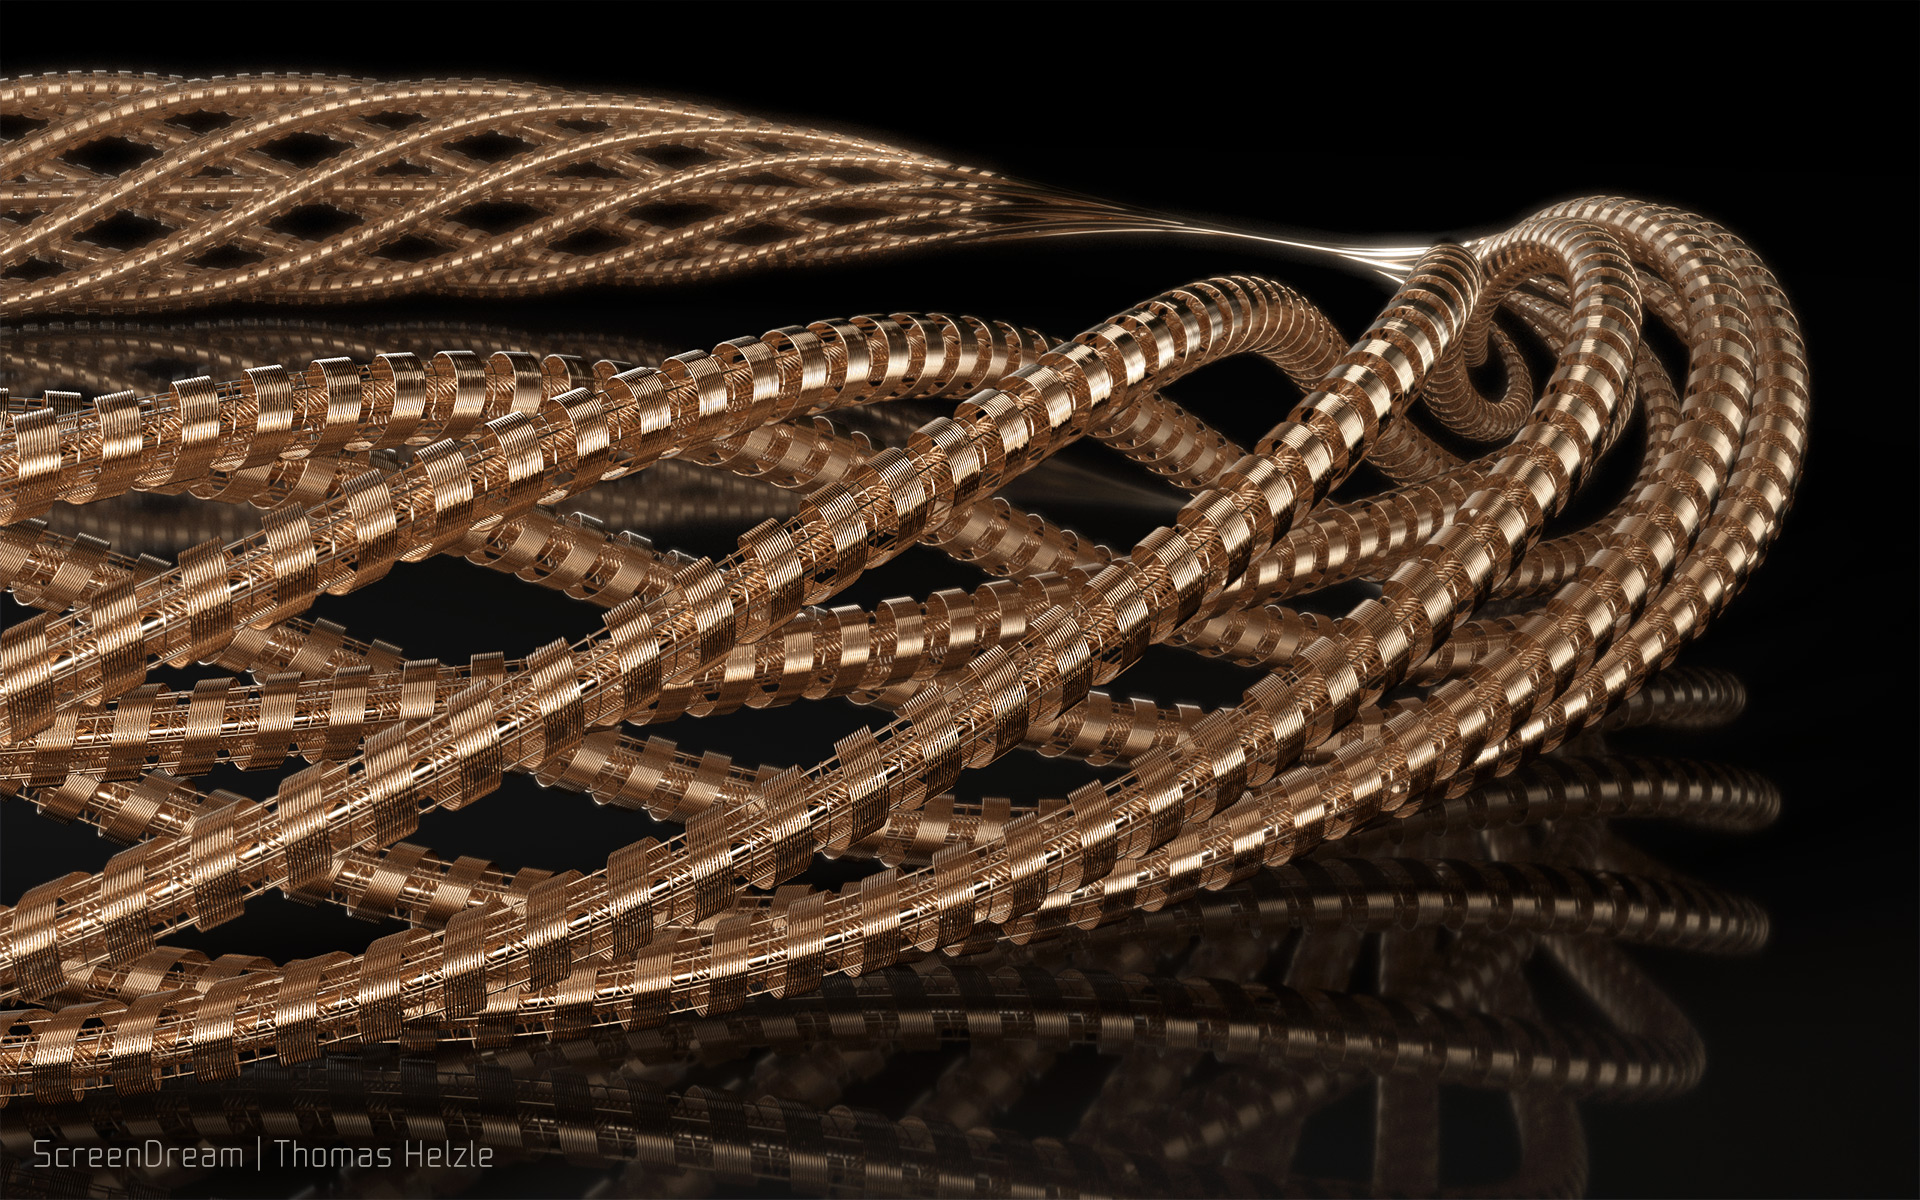 A series of images of wound wires, created in SideFX Houdini